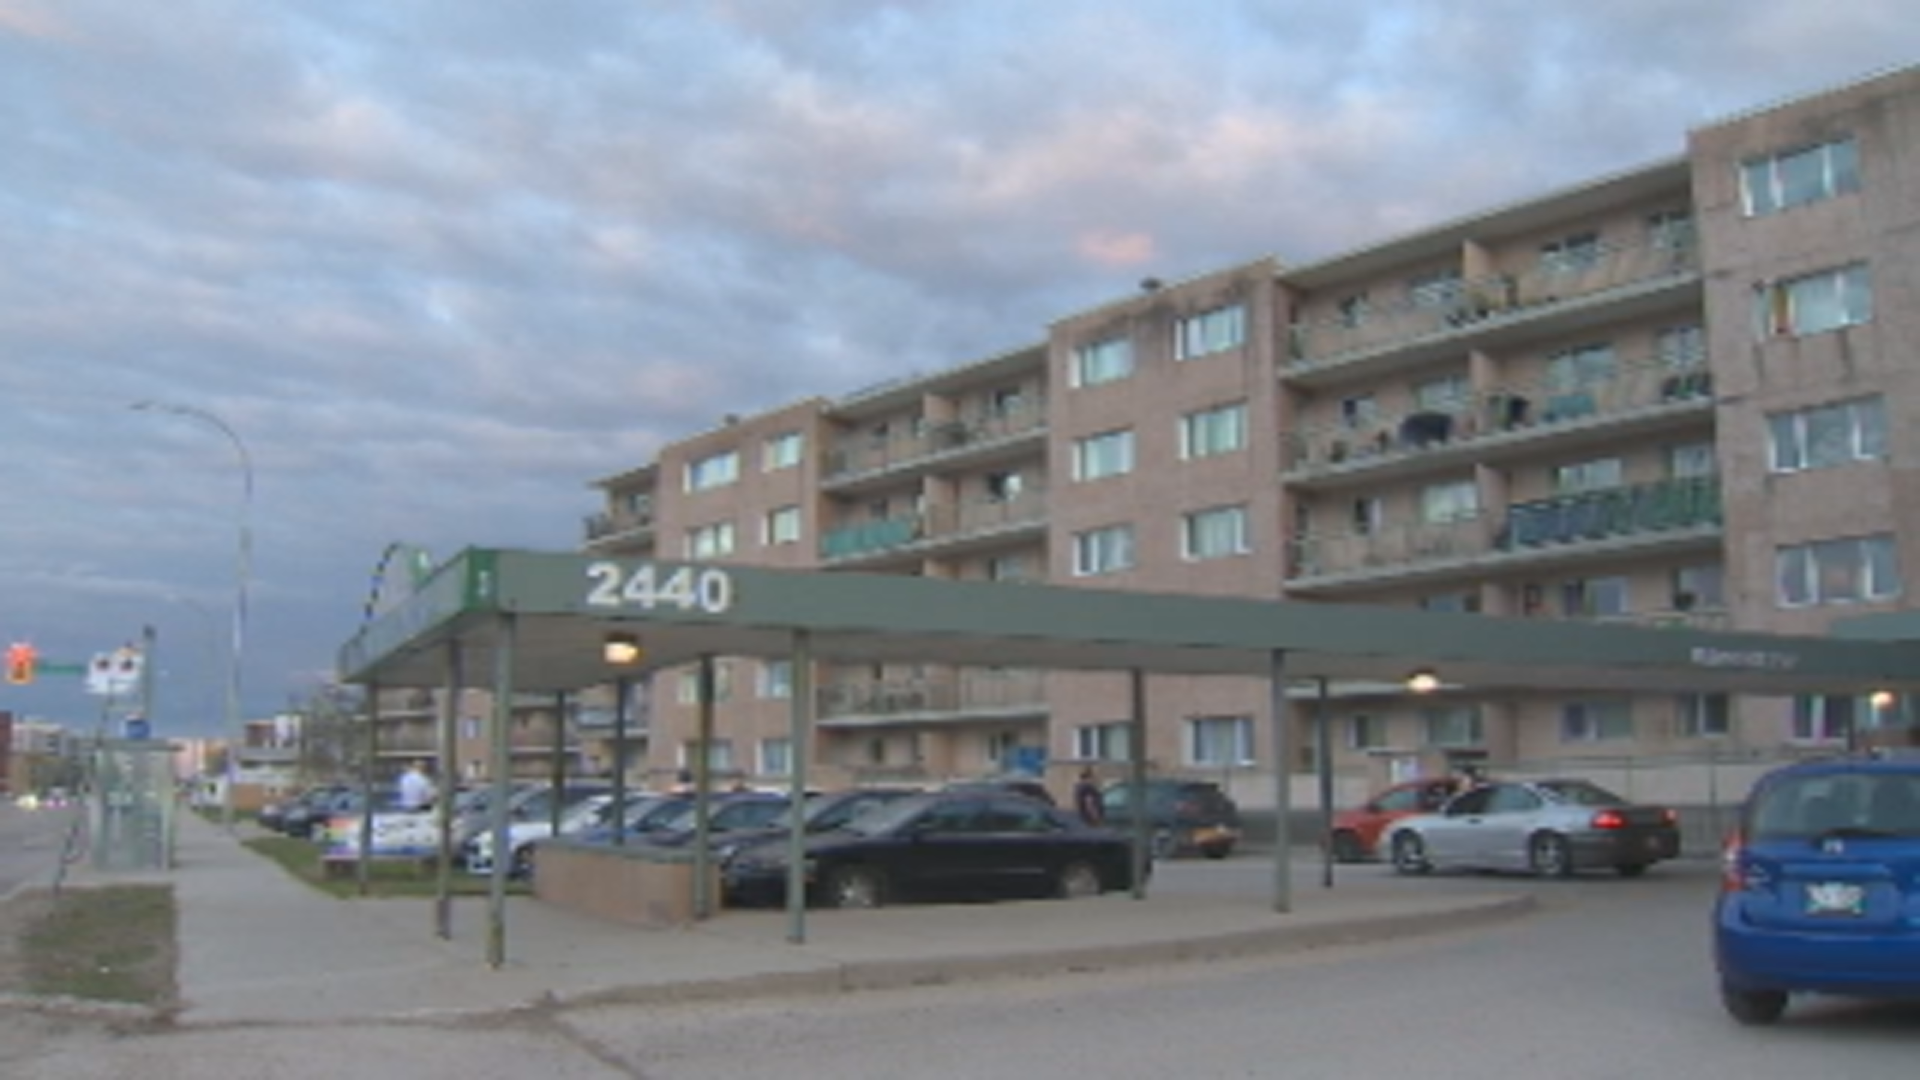 Residents of the Birchwood Terrace apartment block on Portage Avenue are being forced to evacuate, due to structural issues with the building.